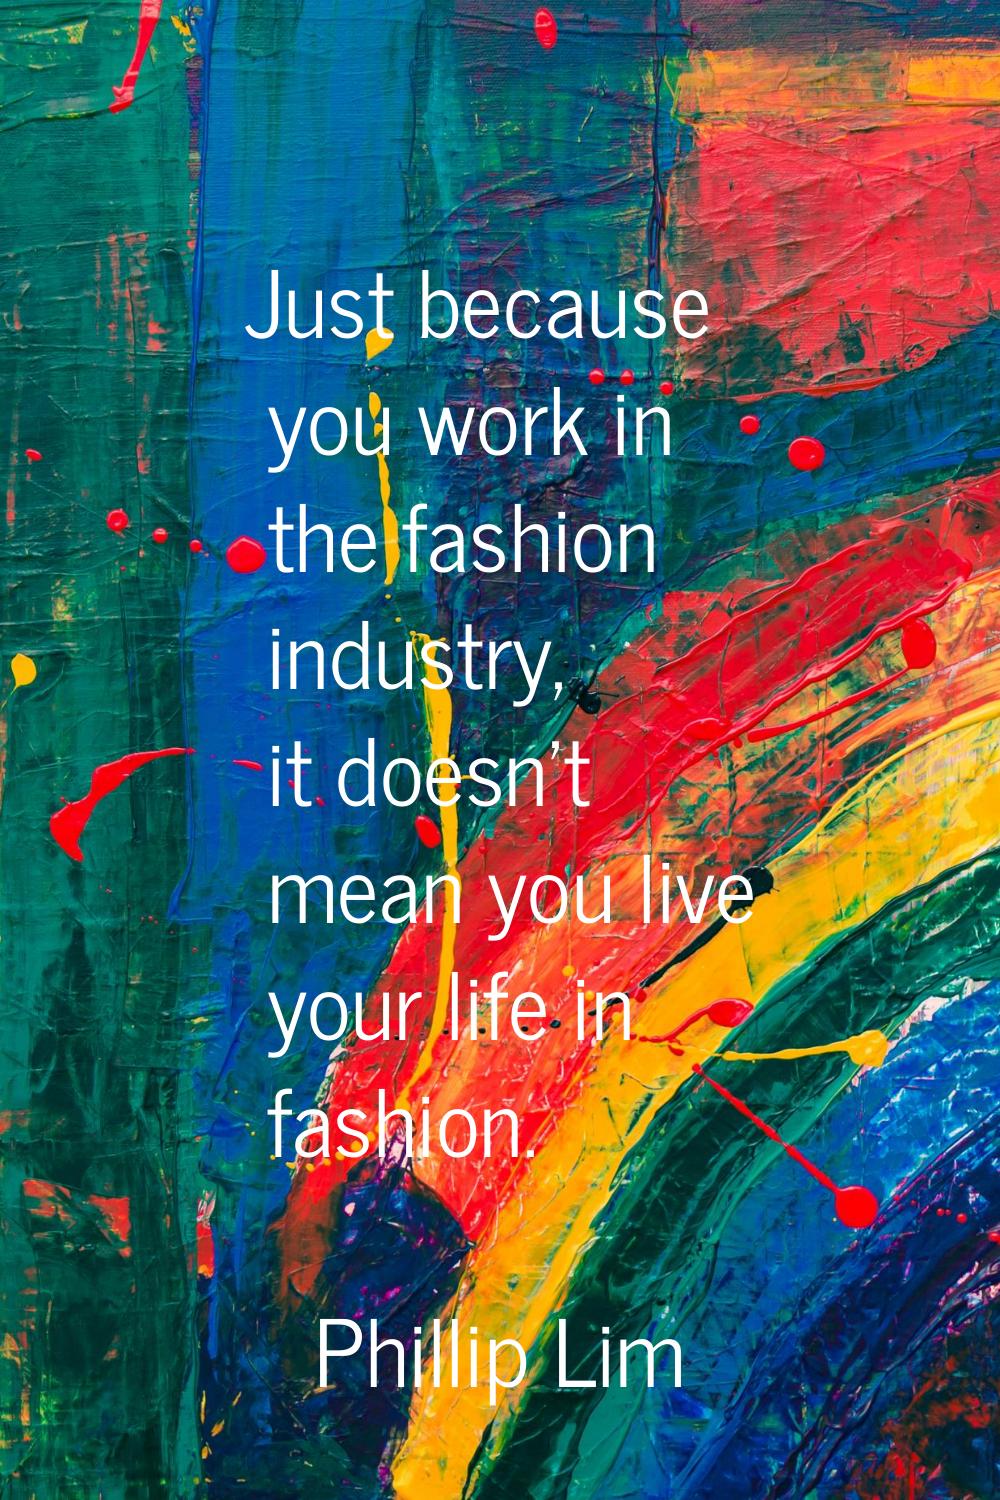 Just because you work in the fashion industry, it doesn't mean you live your life in fashion.